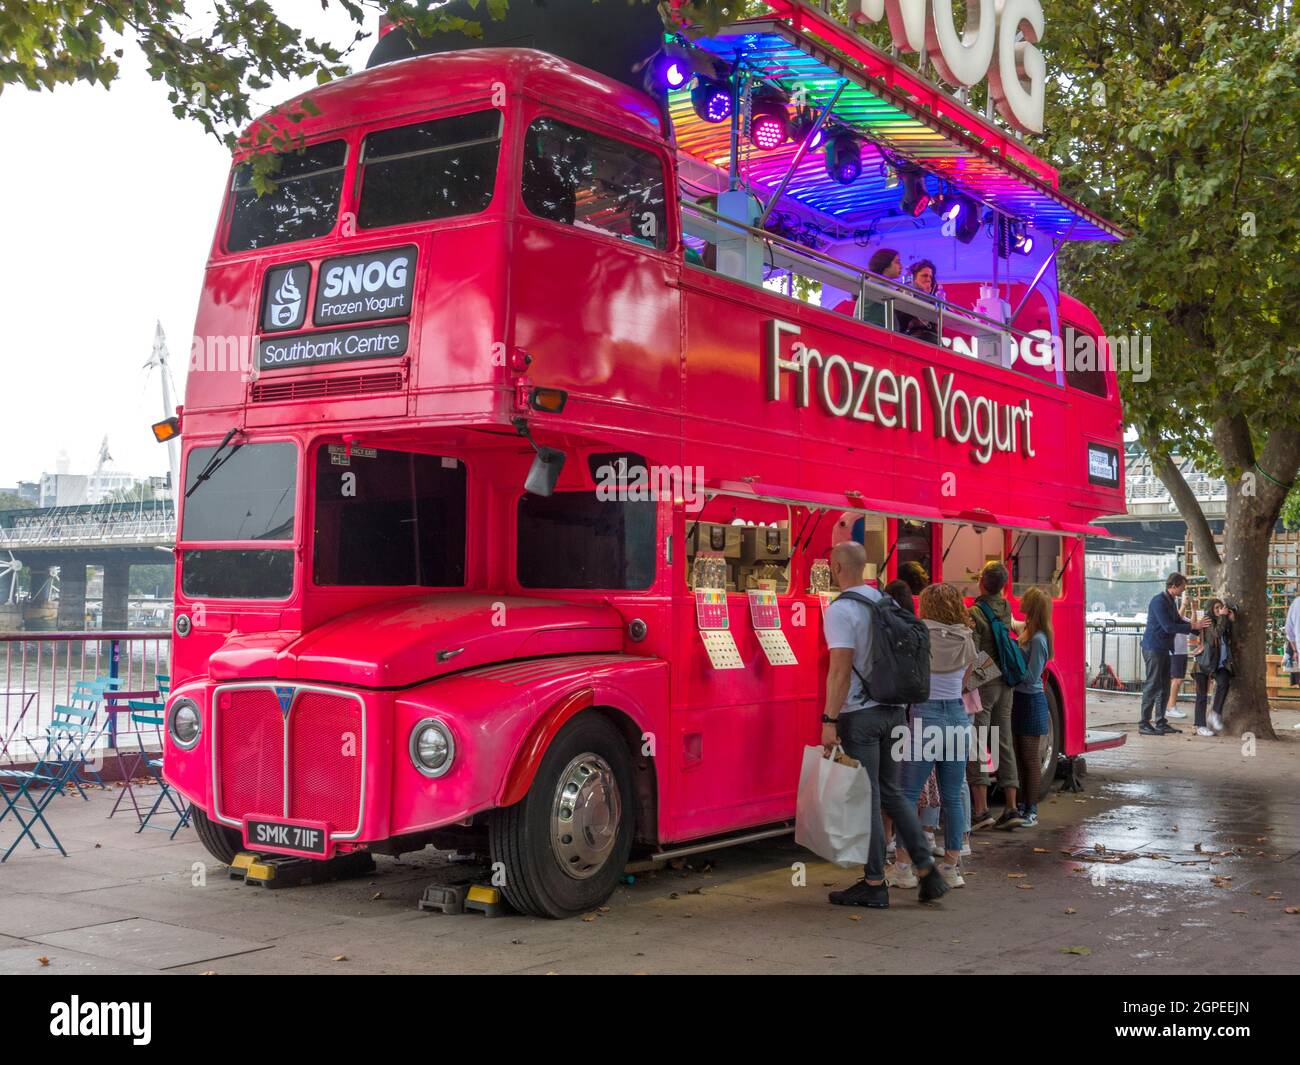 A double decker bus converted to a frozen yoghurt takeway, parked and serving passing customers at South Bank, London, England, UK. Stock Photo